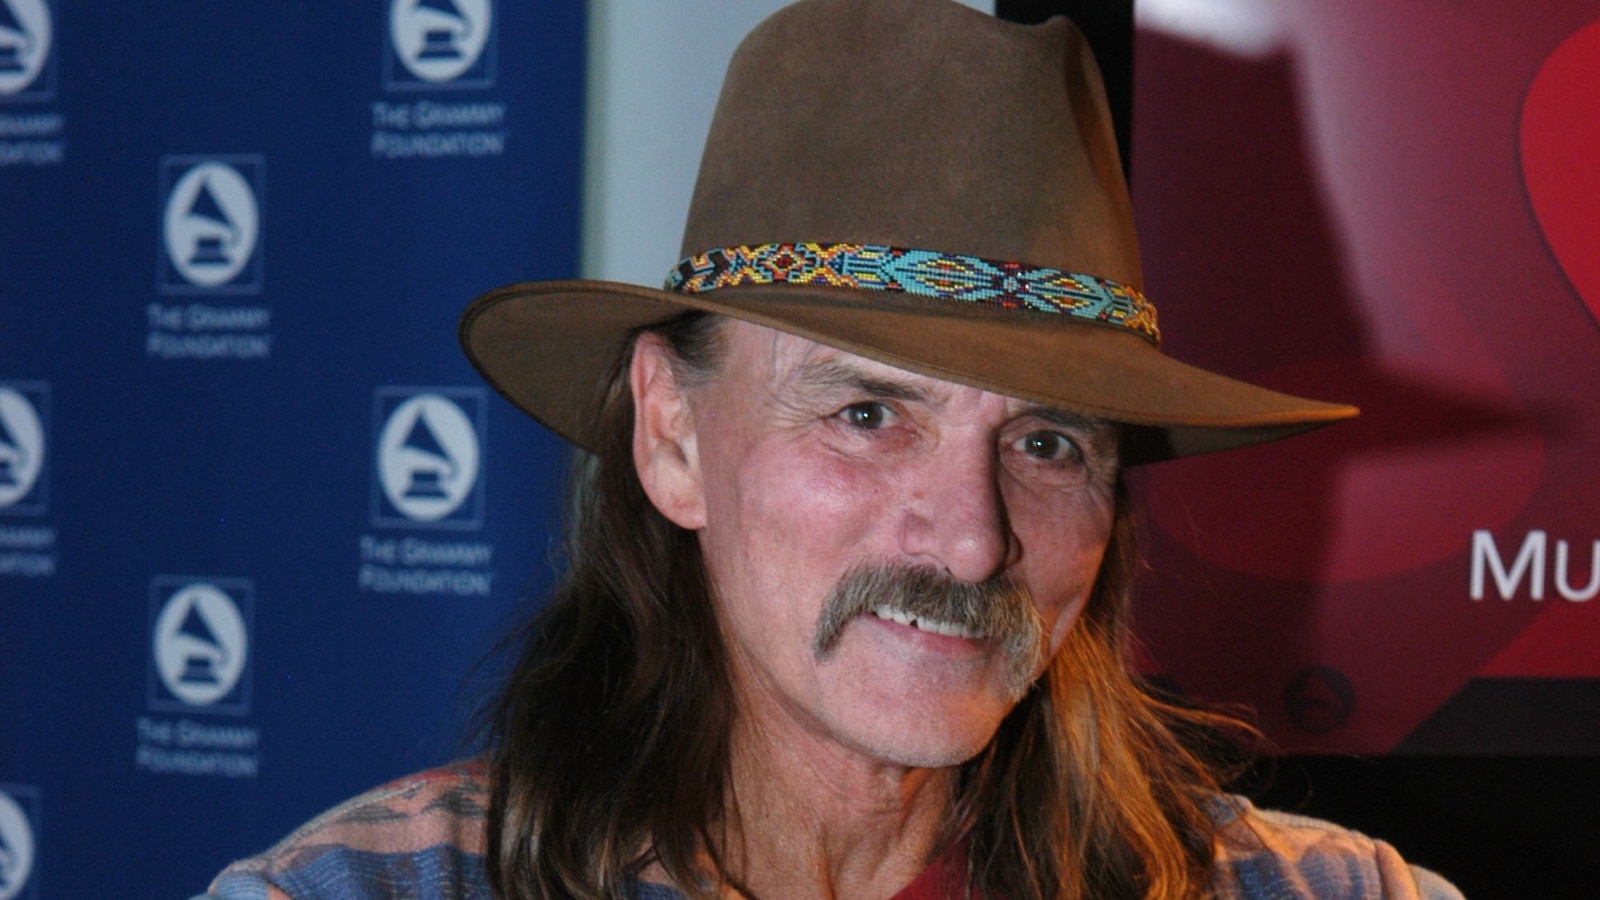 Dickey Betts, Allman Brothers Band singer, songwriter and guitarist, dead at 80